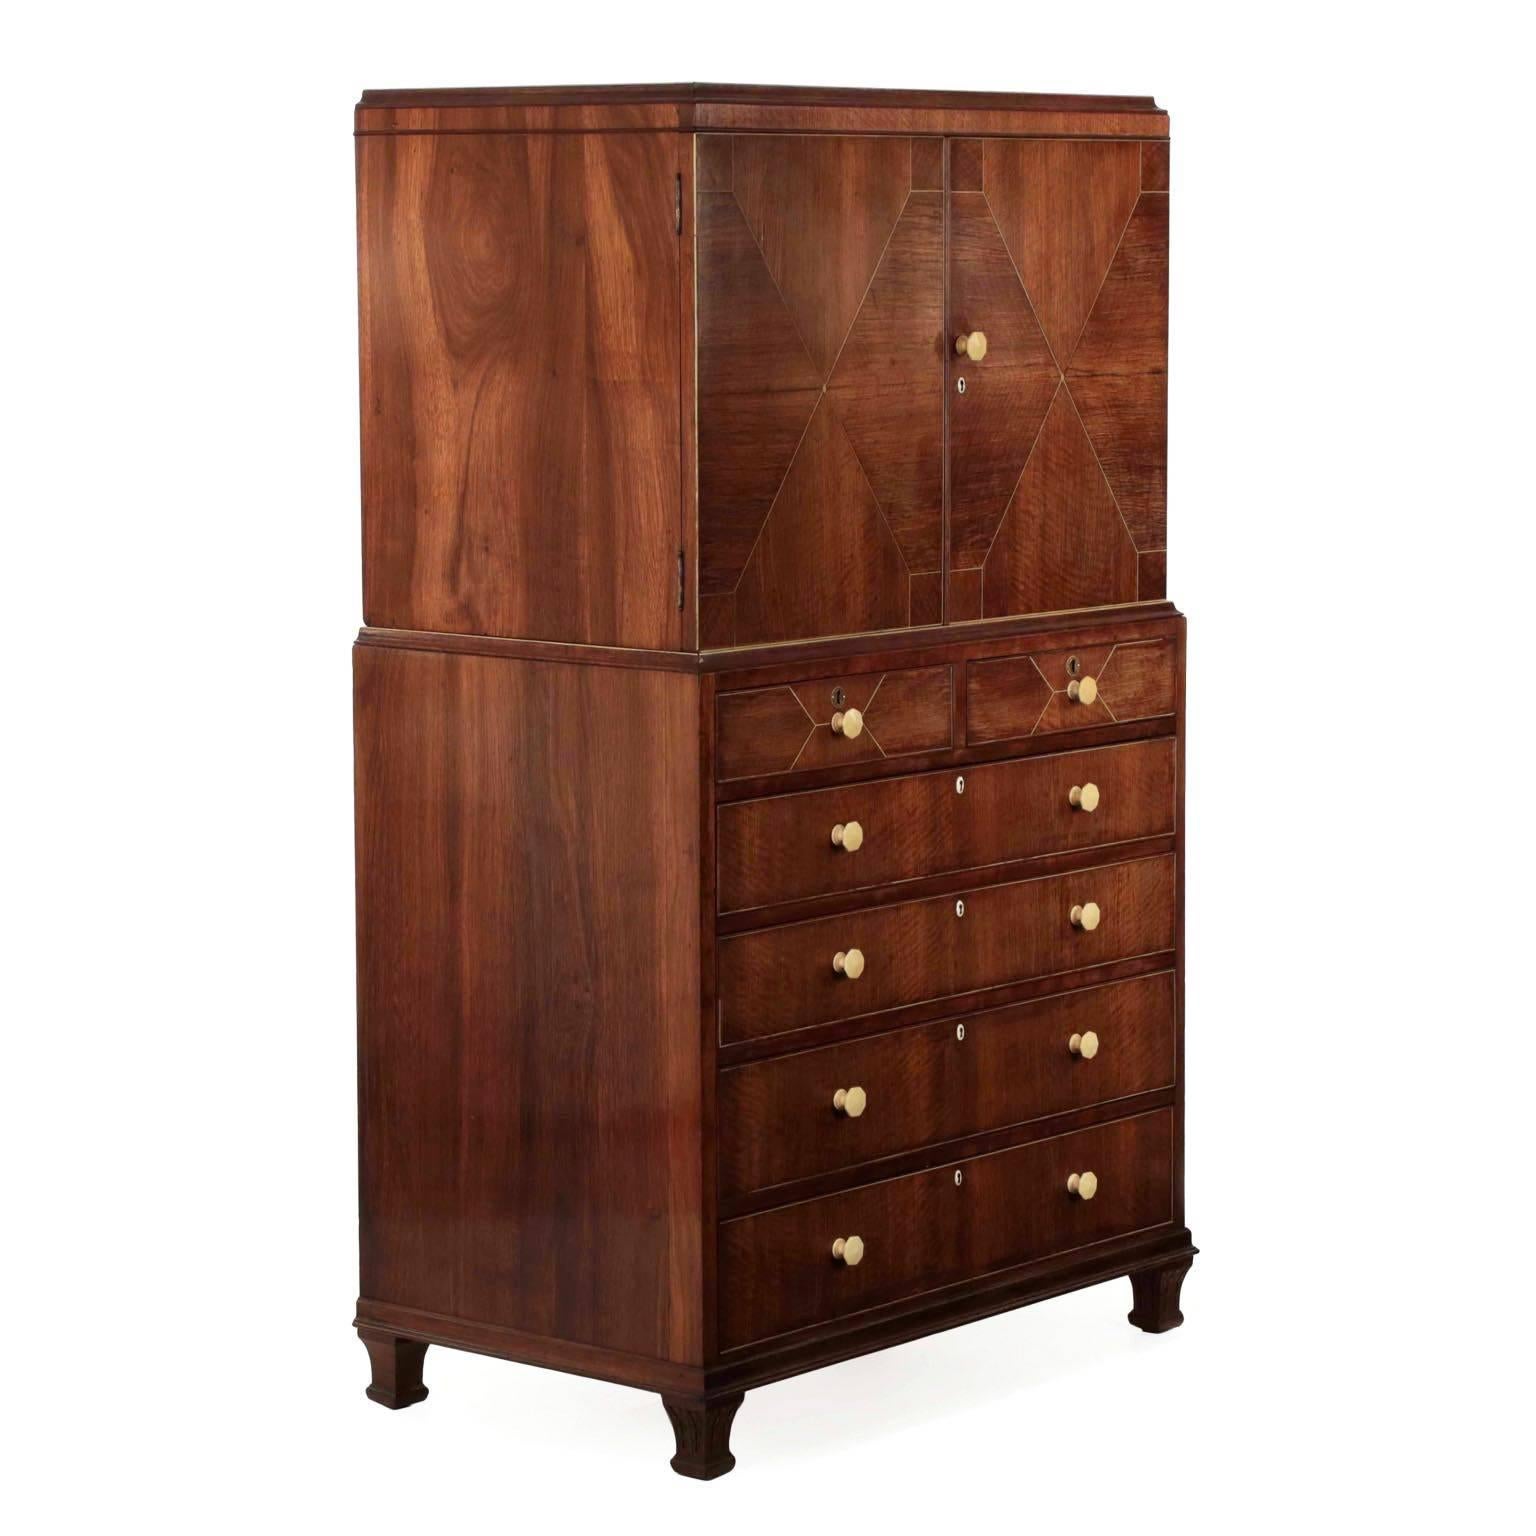 This finely crafted Deco period chiffonier is an interesting intersection of angular simplicity against the rich materials with only light surface embellishment. The primary surfaces are veneered with a wonderful mellowed rosewood; the exotic wood